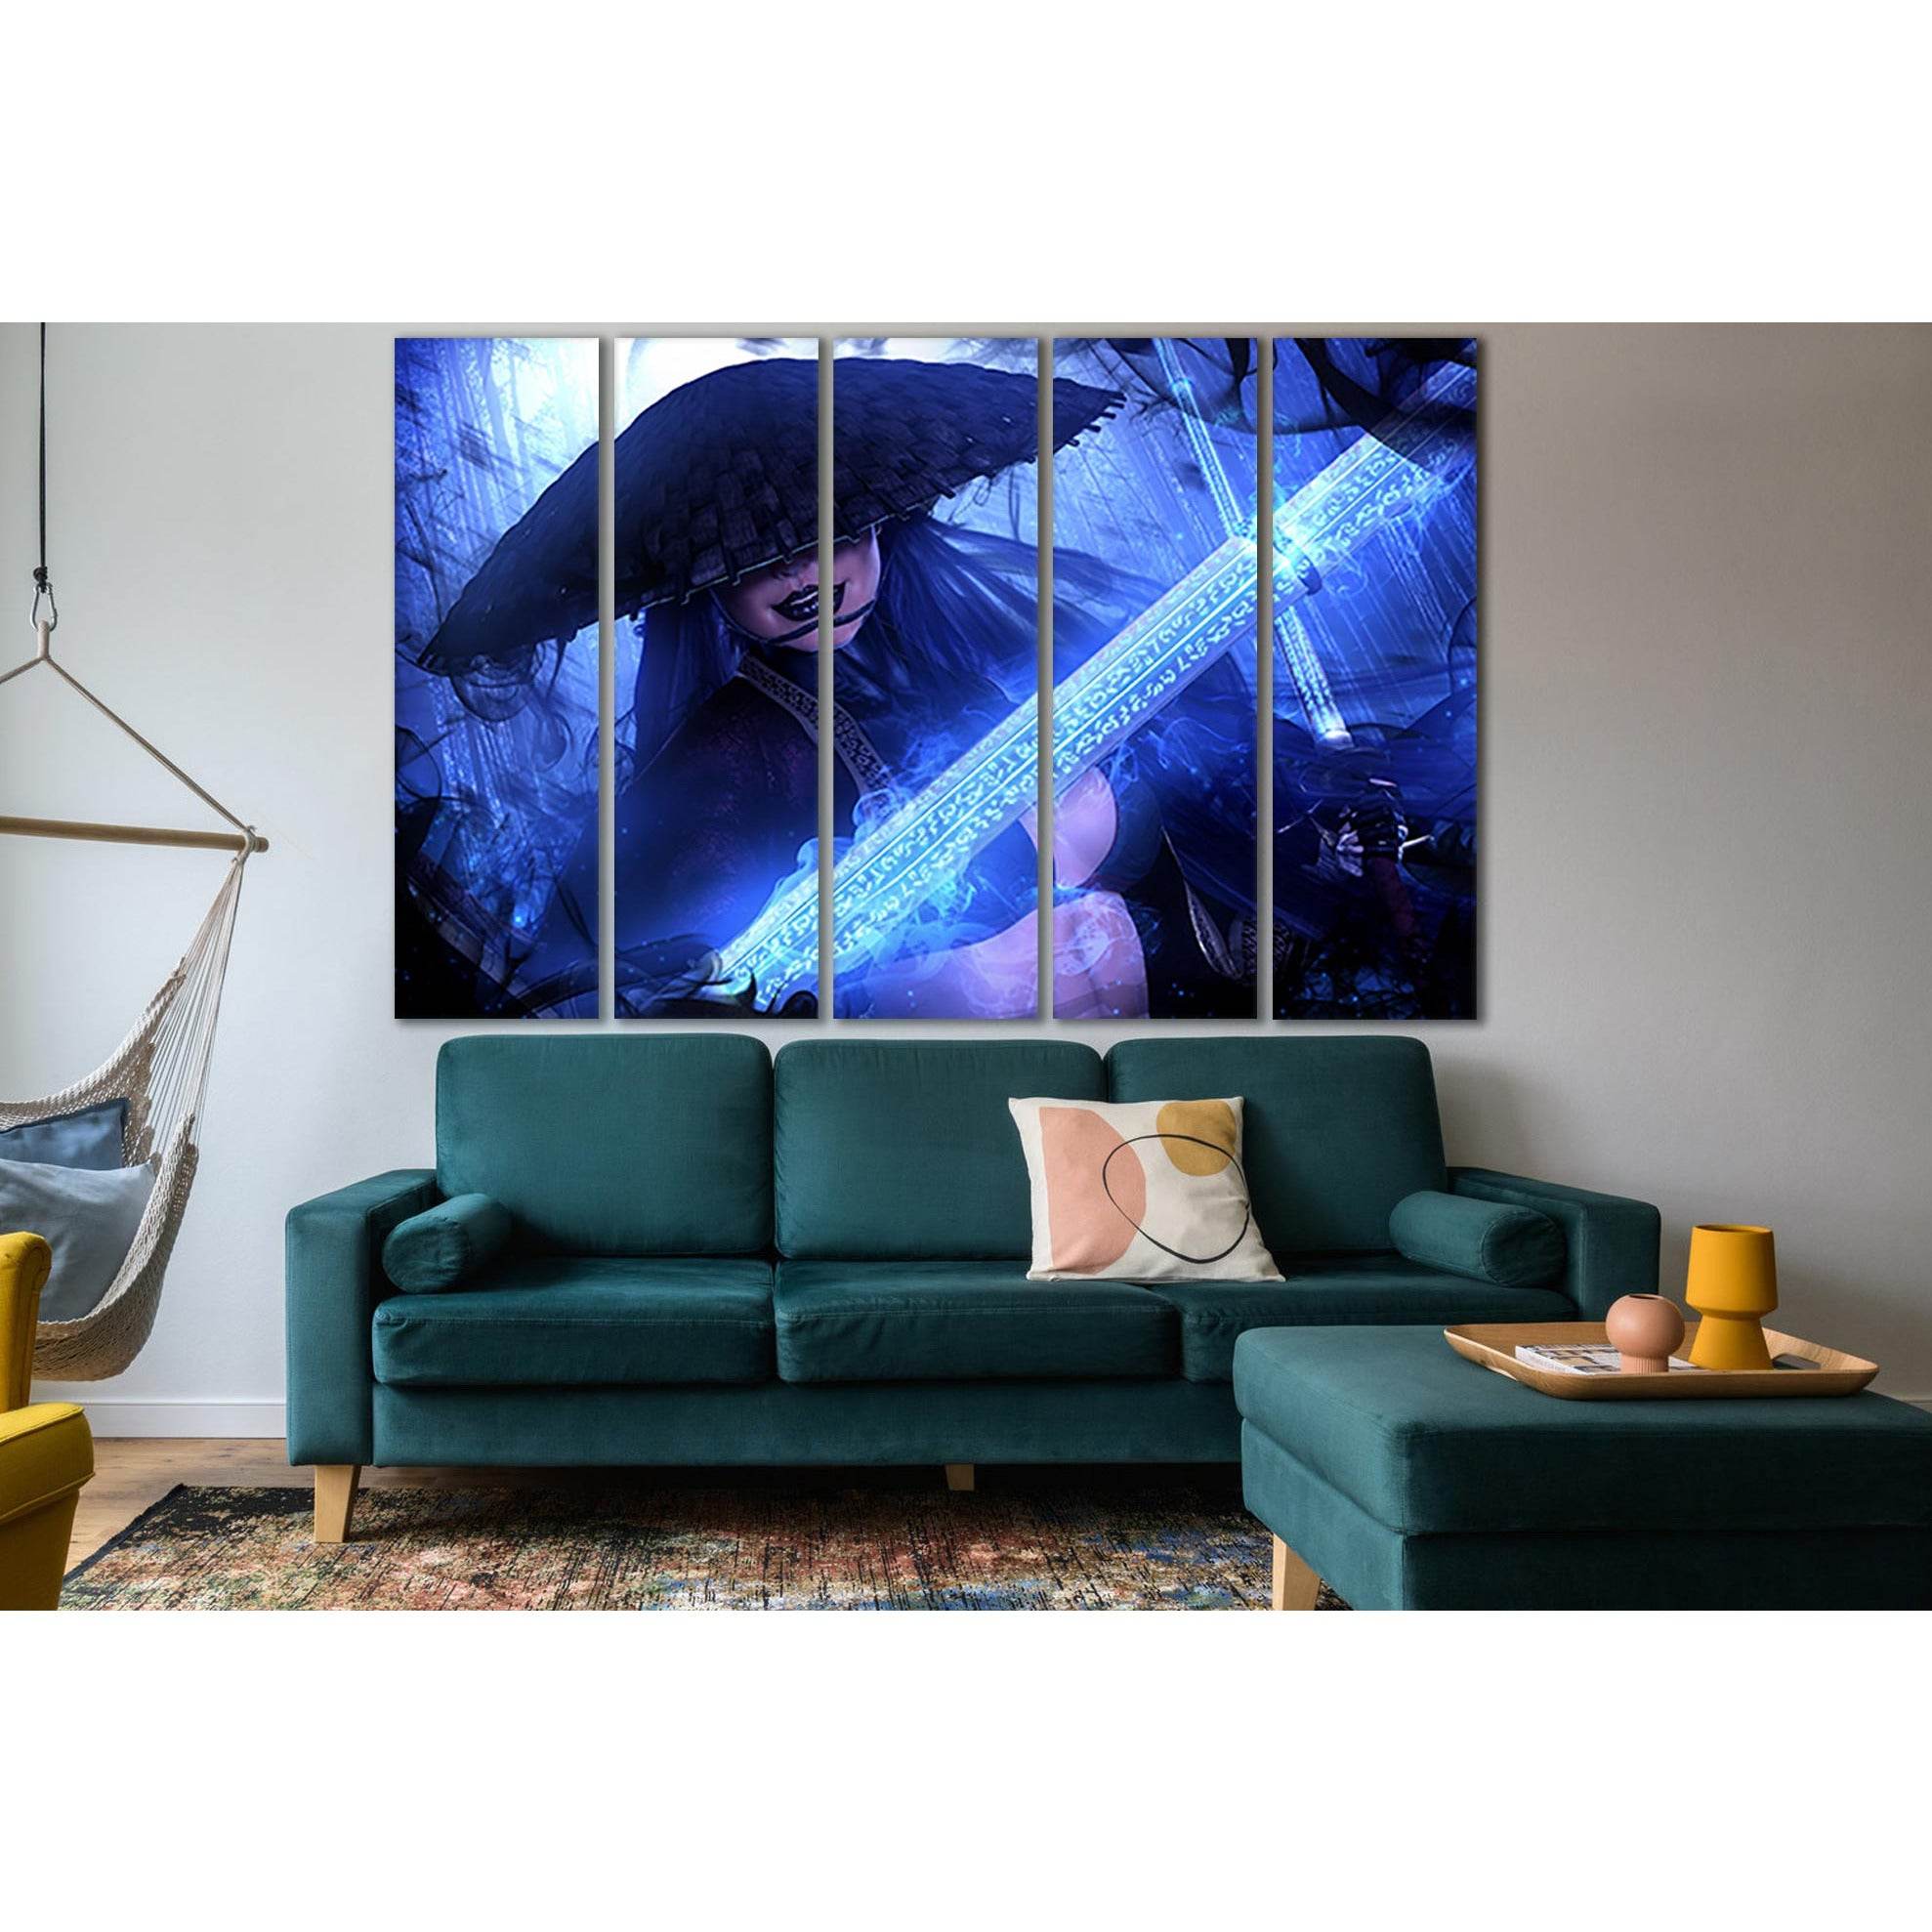 Woman With Magic Sword №SL1244 Ready to Hang Canvas Print